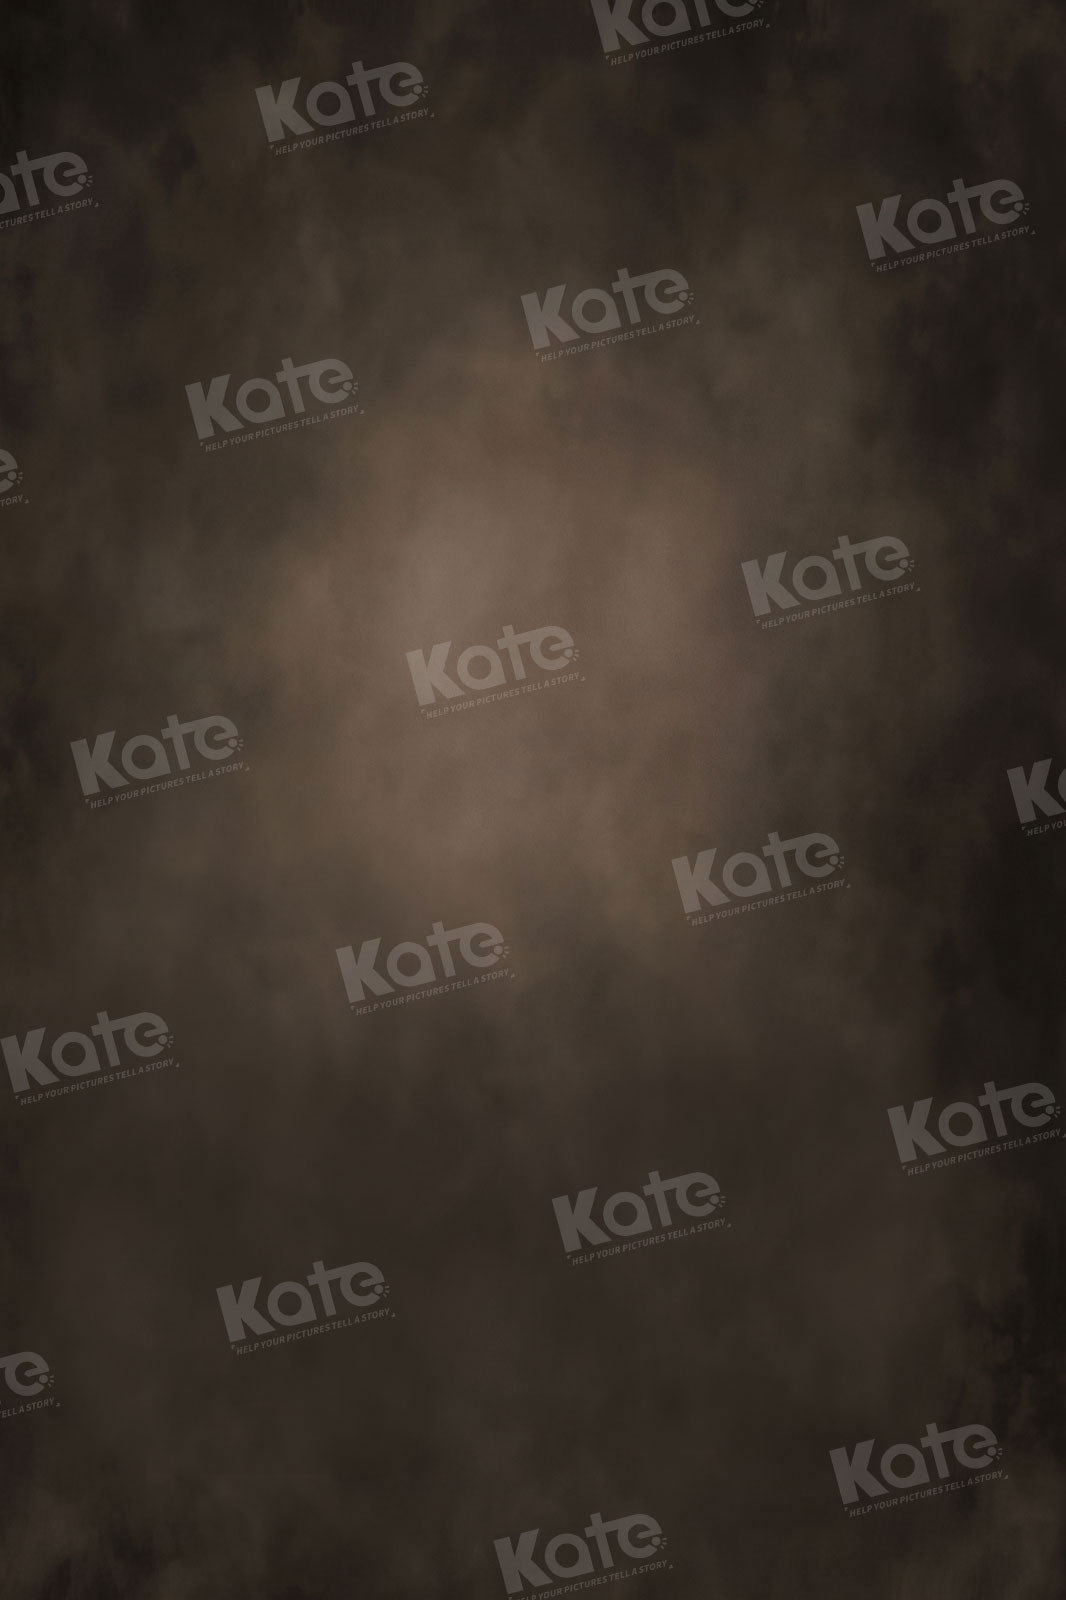 Kate Abstract Dark Brown Film Backdrop for Photography